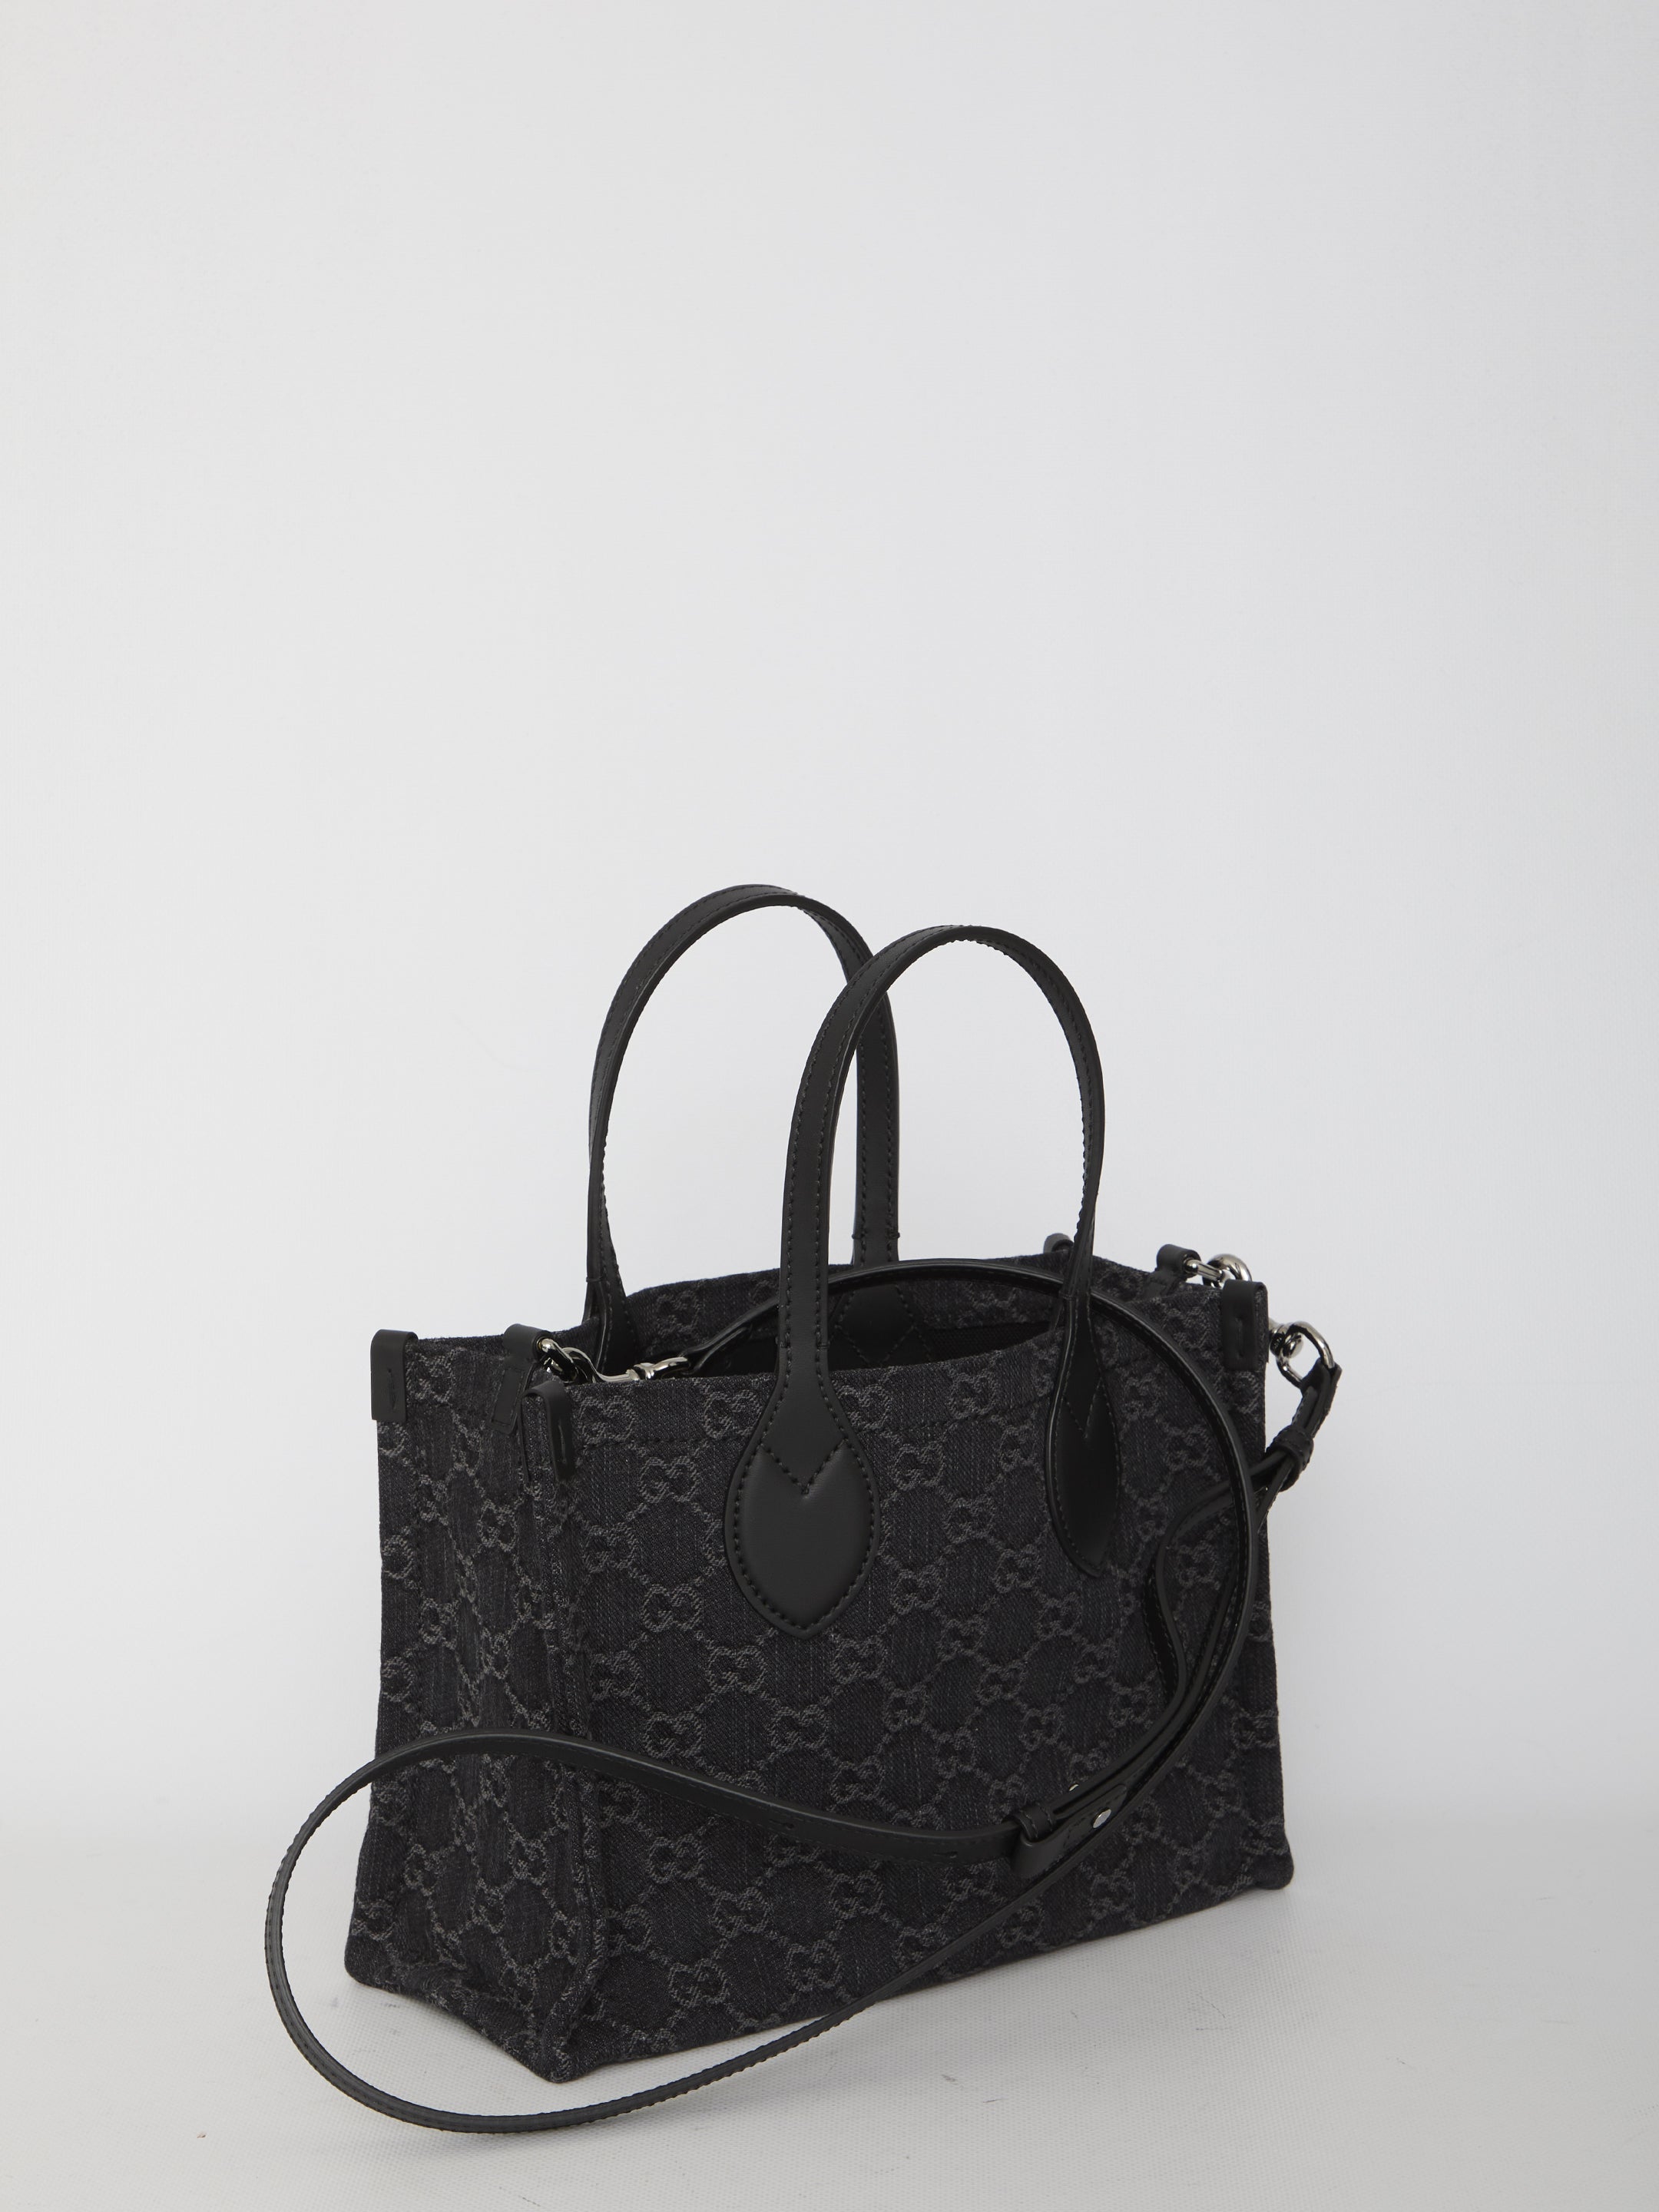 GUCCI-OUTLET-SALE-Ophidia-GG-shopping-bag-Taschen-QT-BLACK-ARCHIVE-COLLECTION-2.jpg